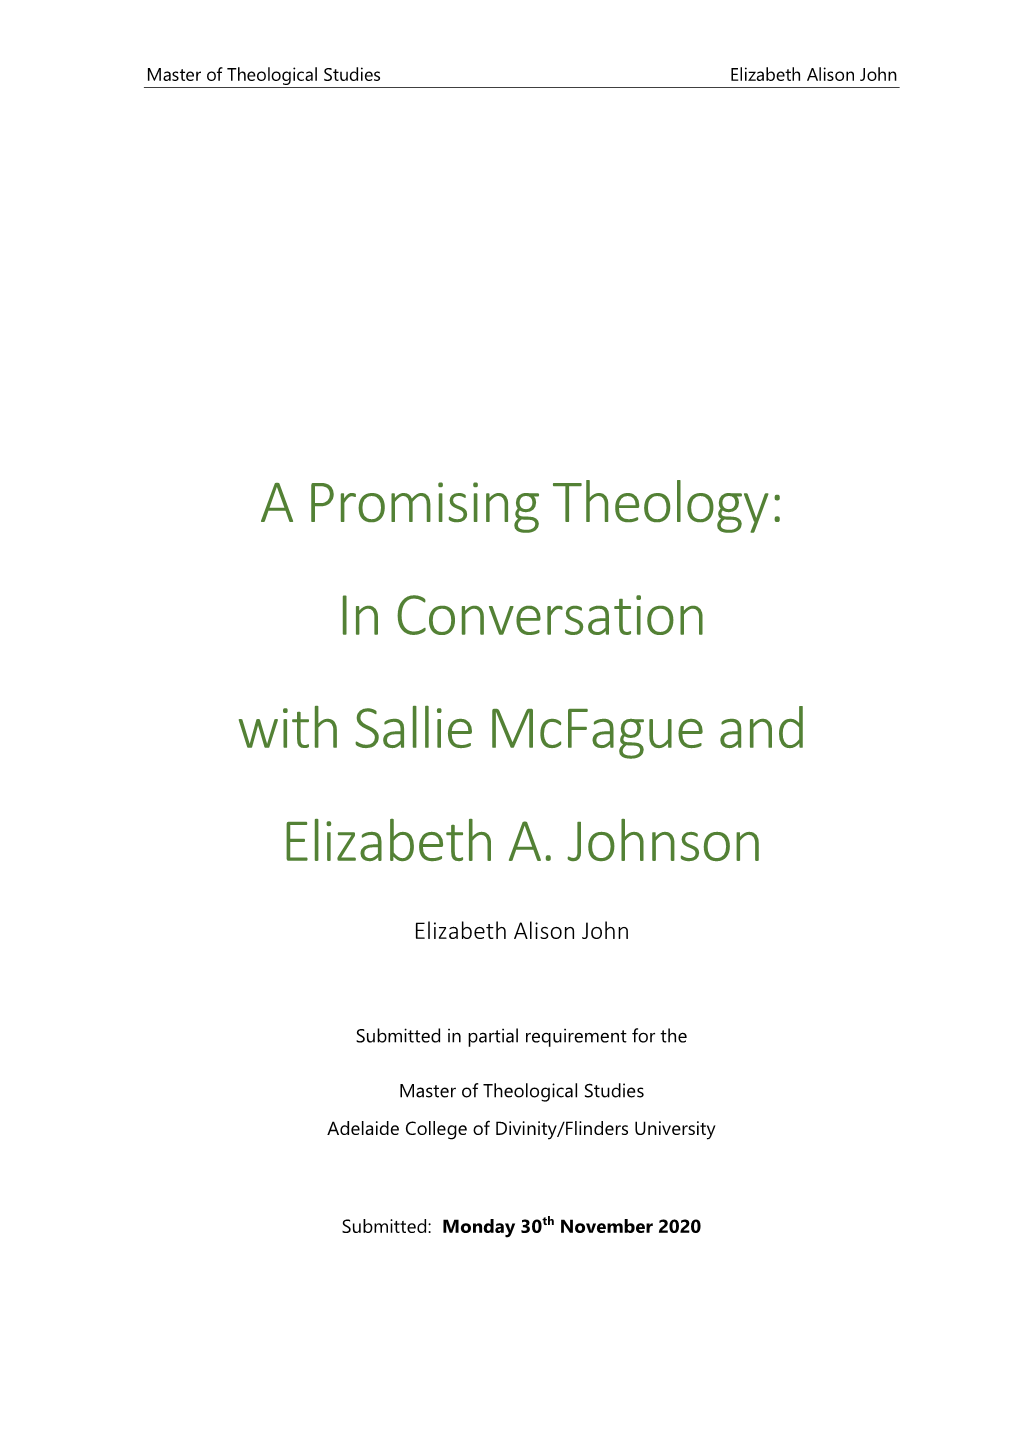 A Promising Theology: in Conversation with Sallie Mcfague and Elizabeth A